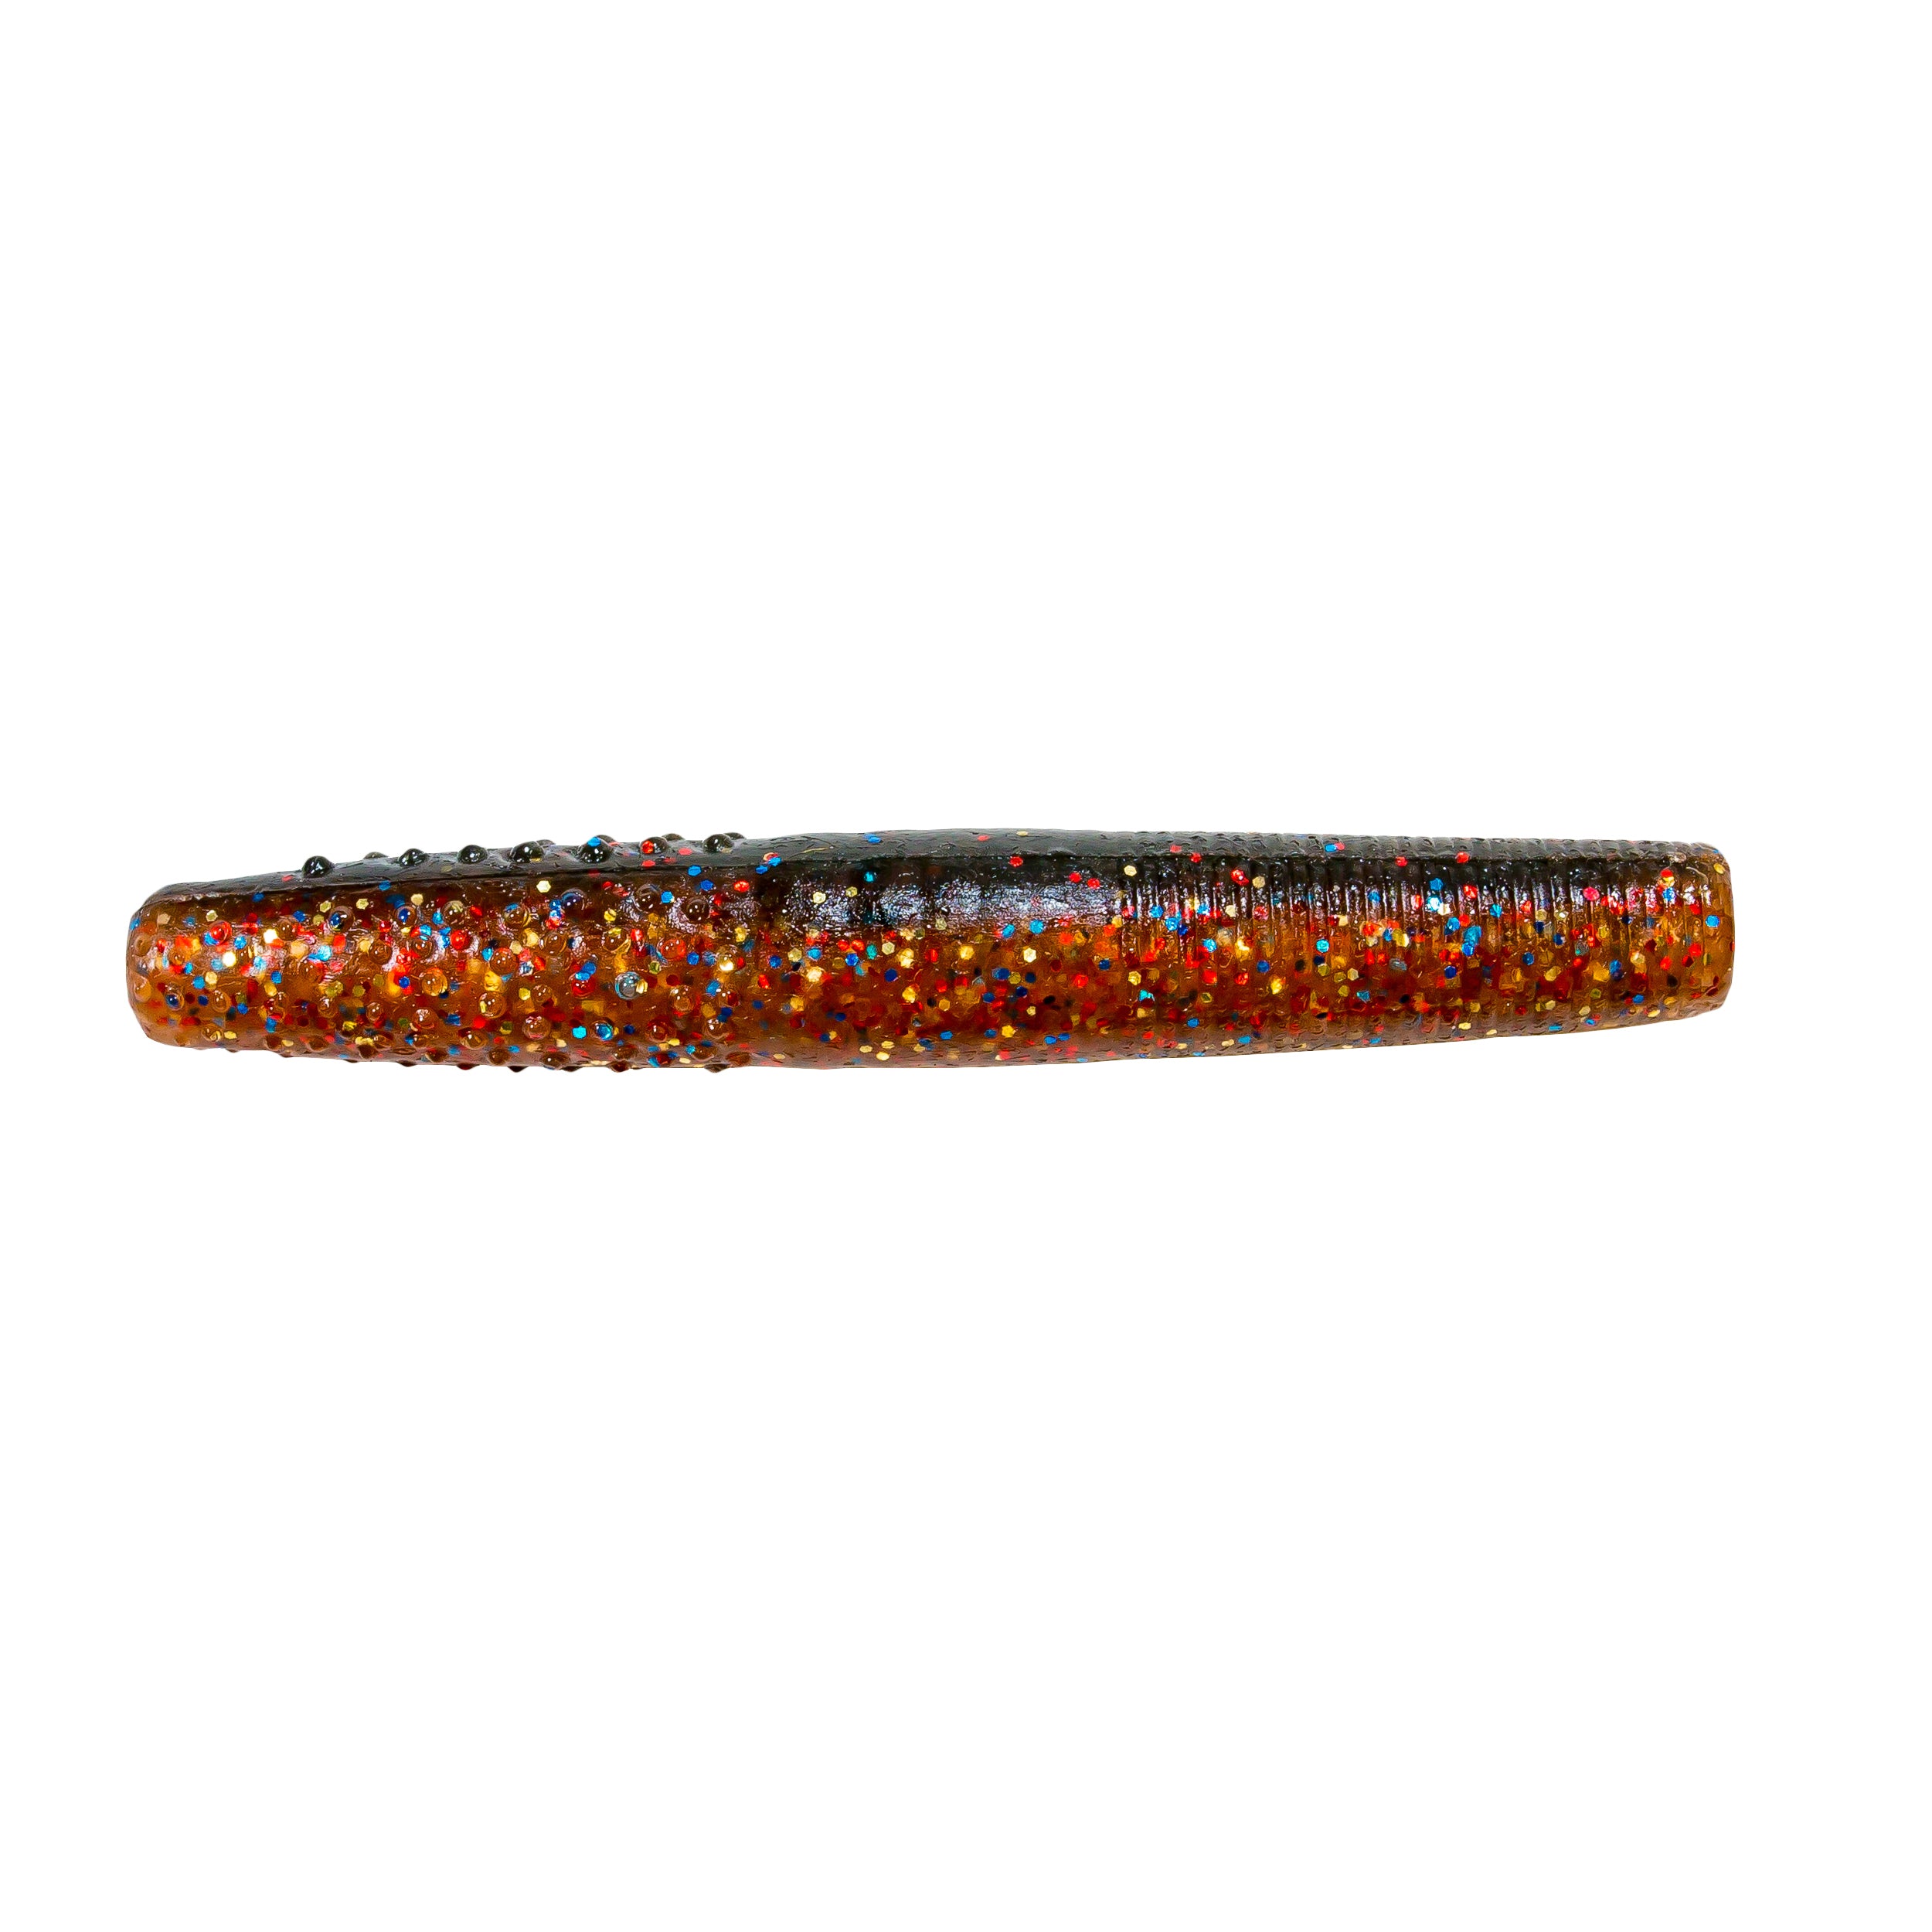 Z-MAN FINESSE TRD - Copperstate Tackle